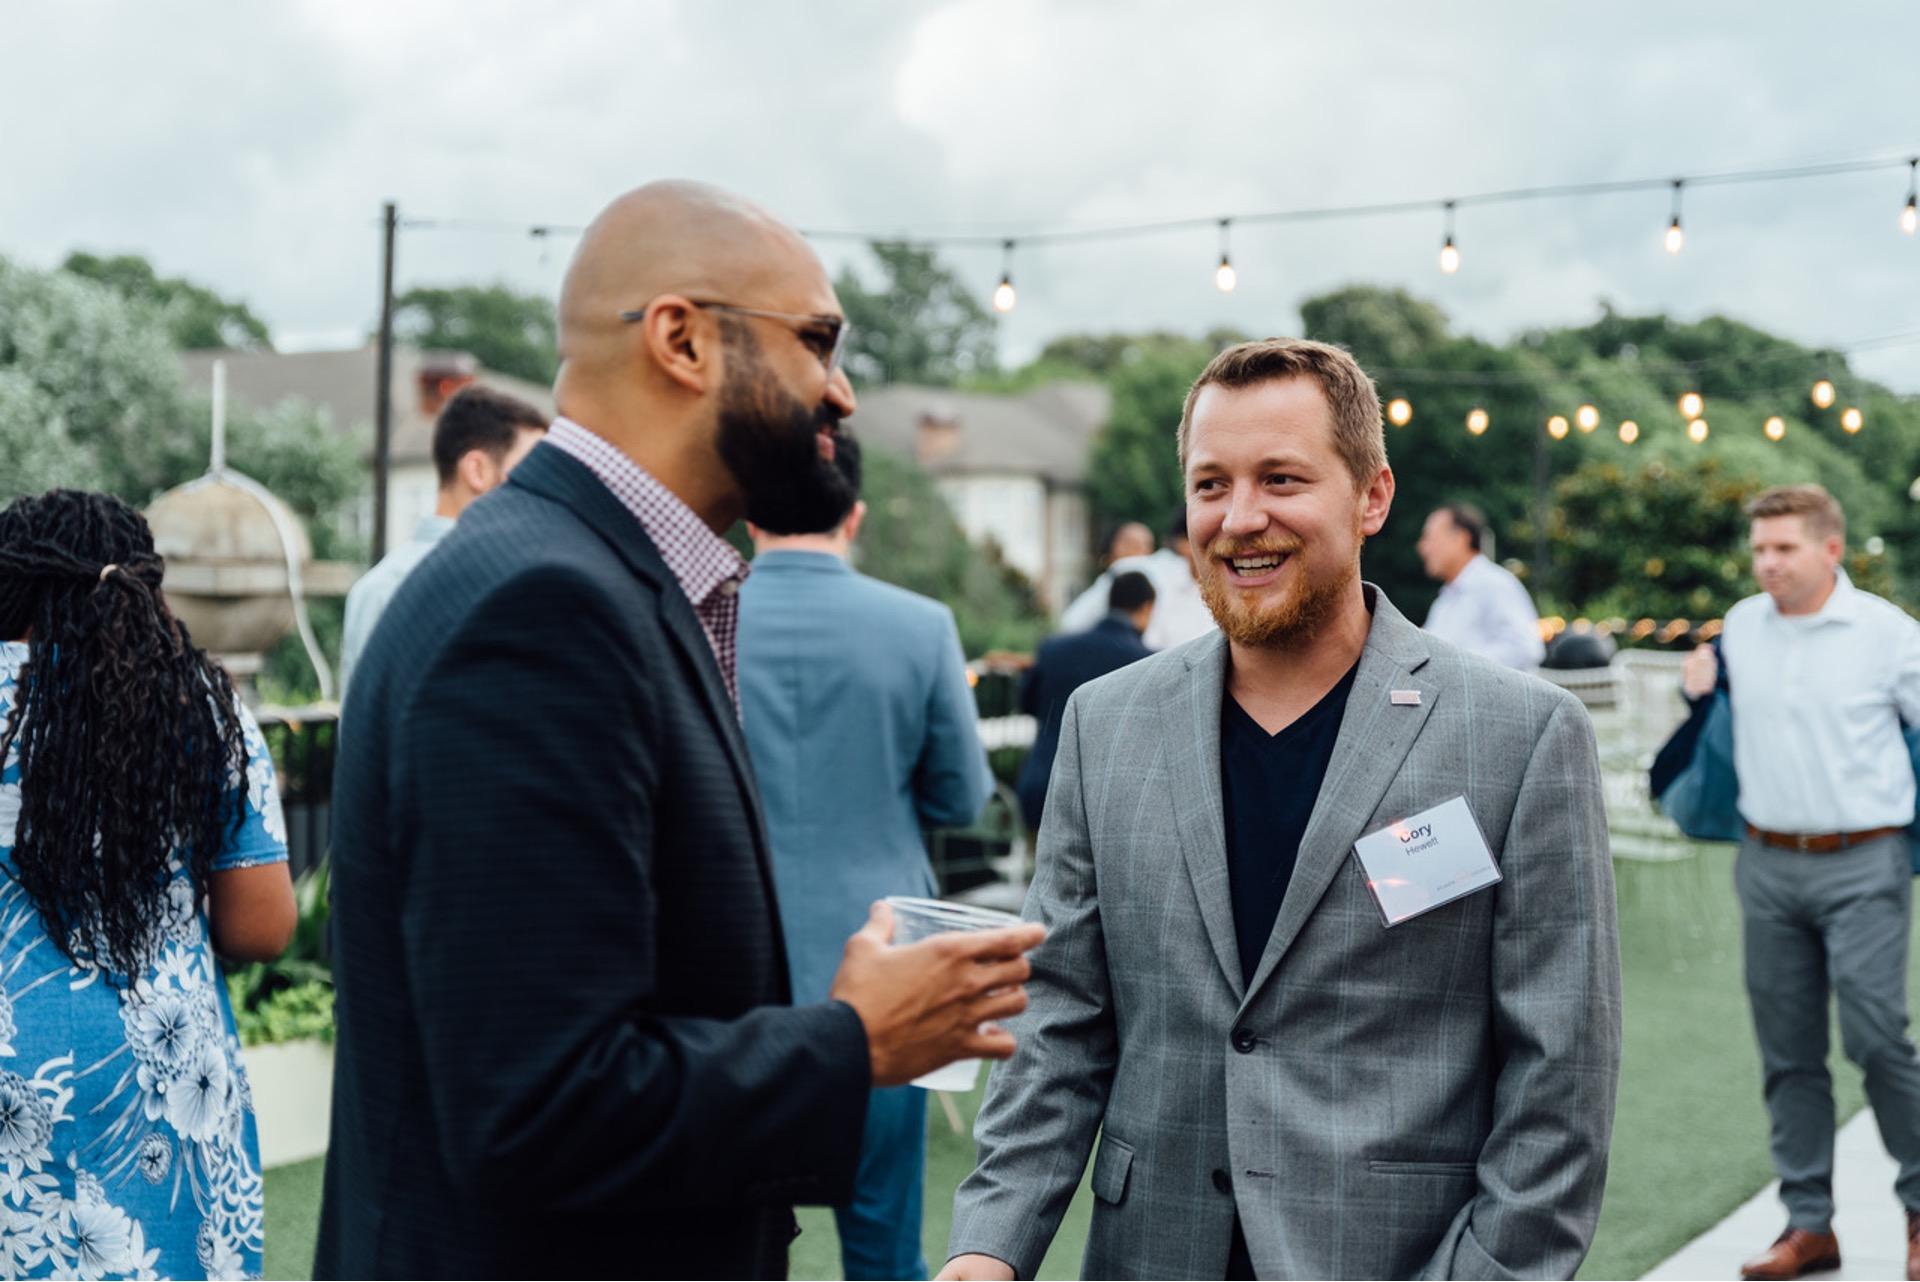 Corey Hewitt, cofounder of Gimme Vending, laughs as he mingles at an outdoor event. 